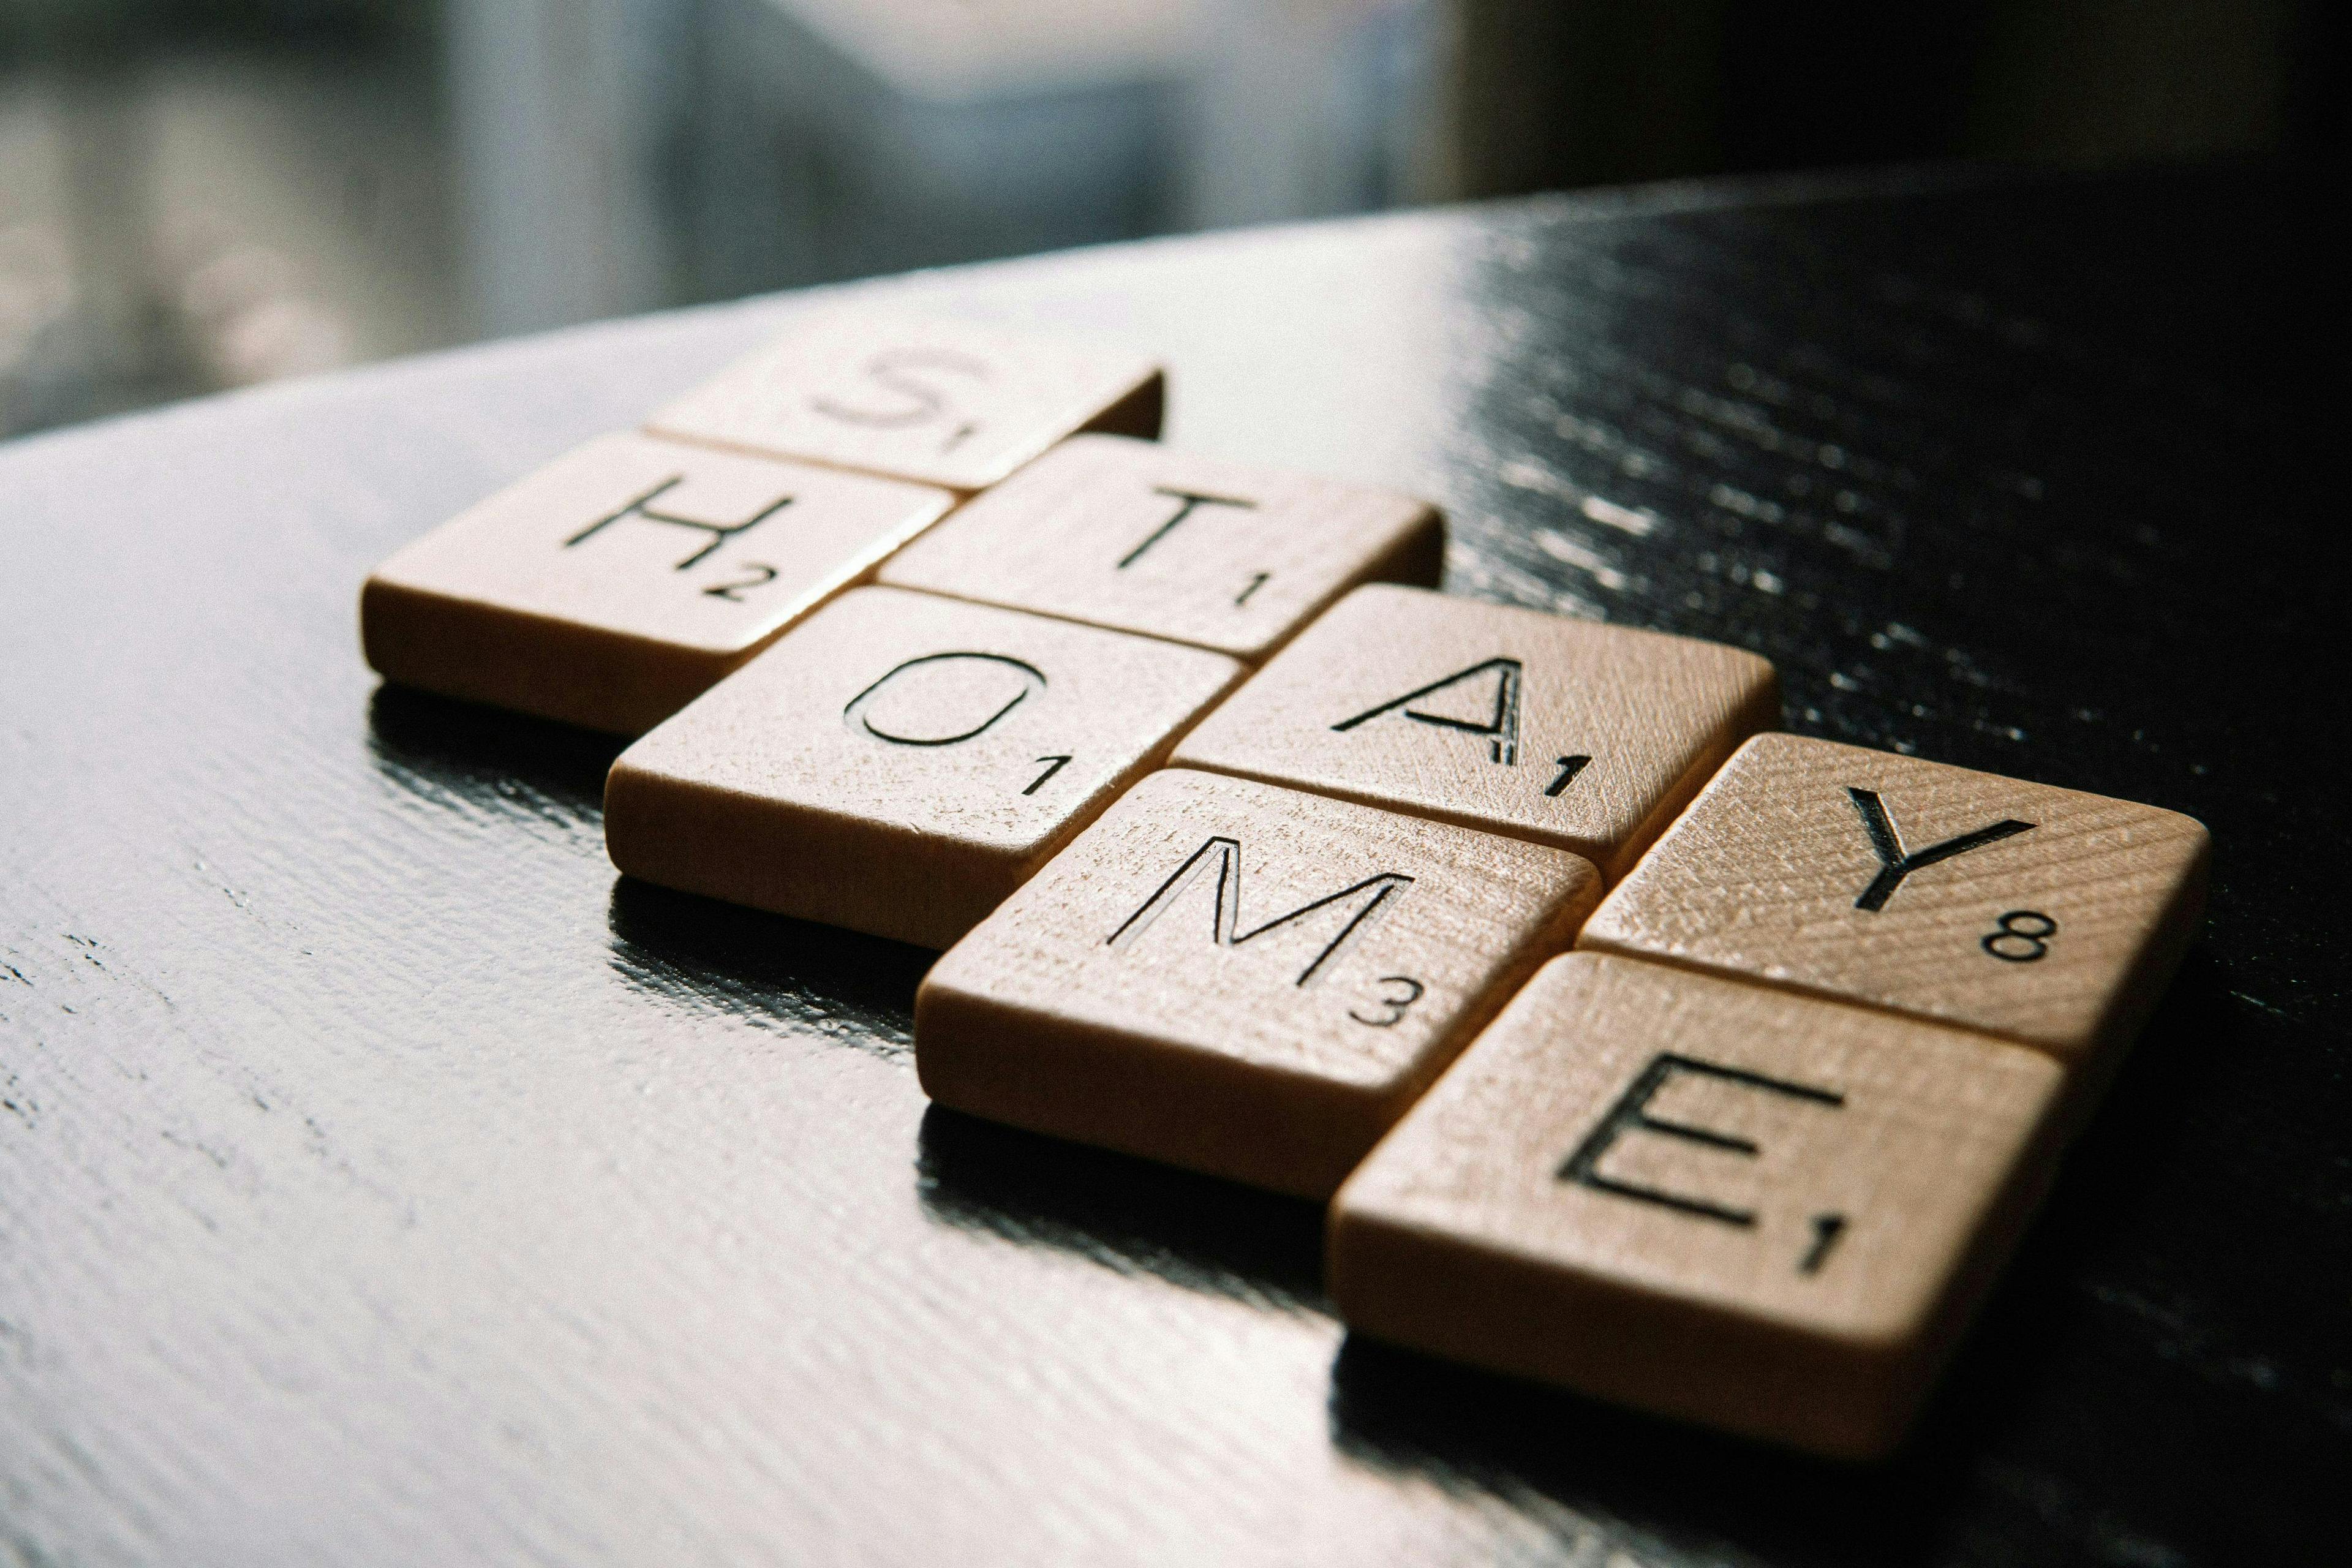 Wooden letter tiles spell "STAY HOME" on a dark wooden surface, with natural light coming through a blurred indoor background.